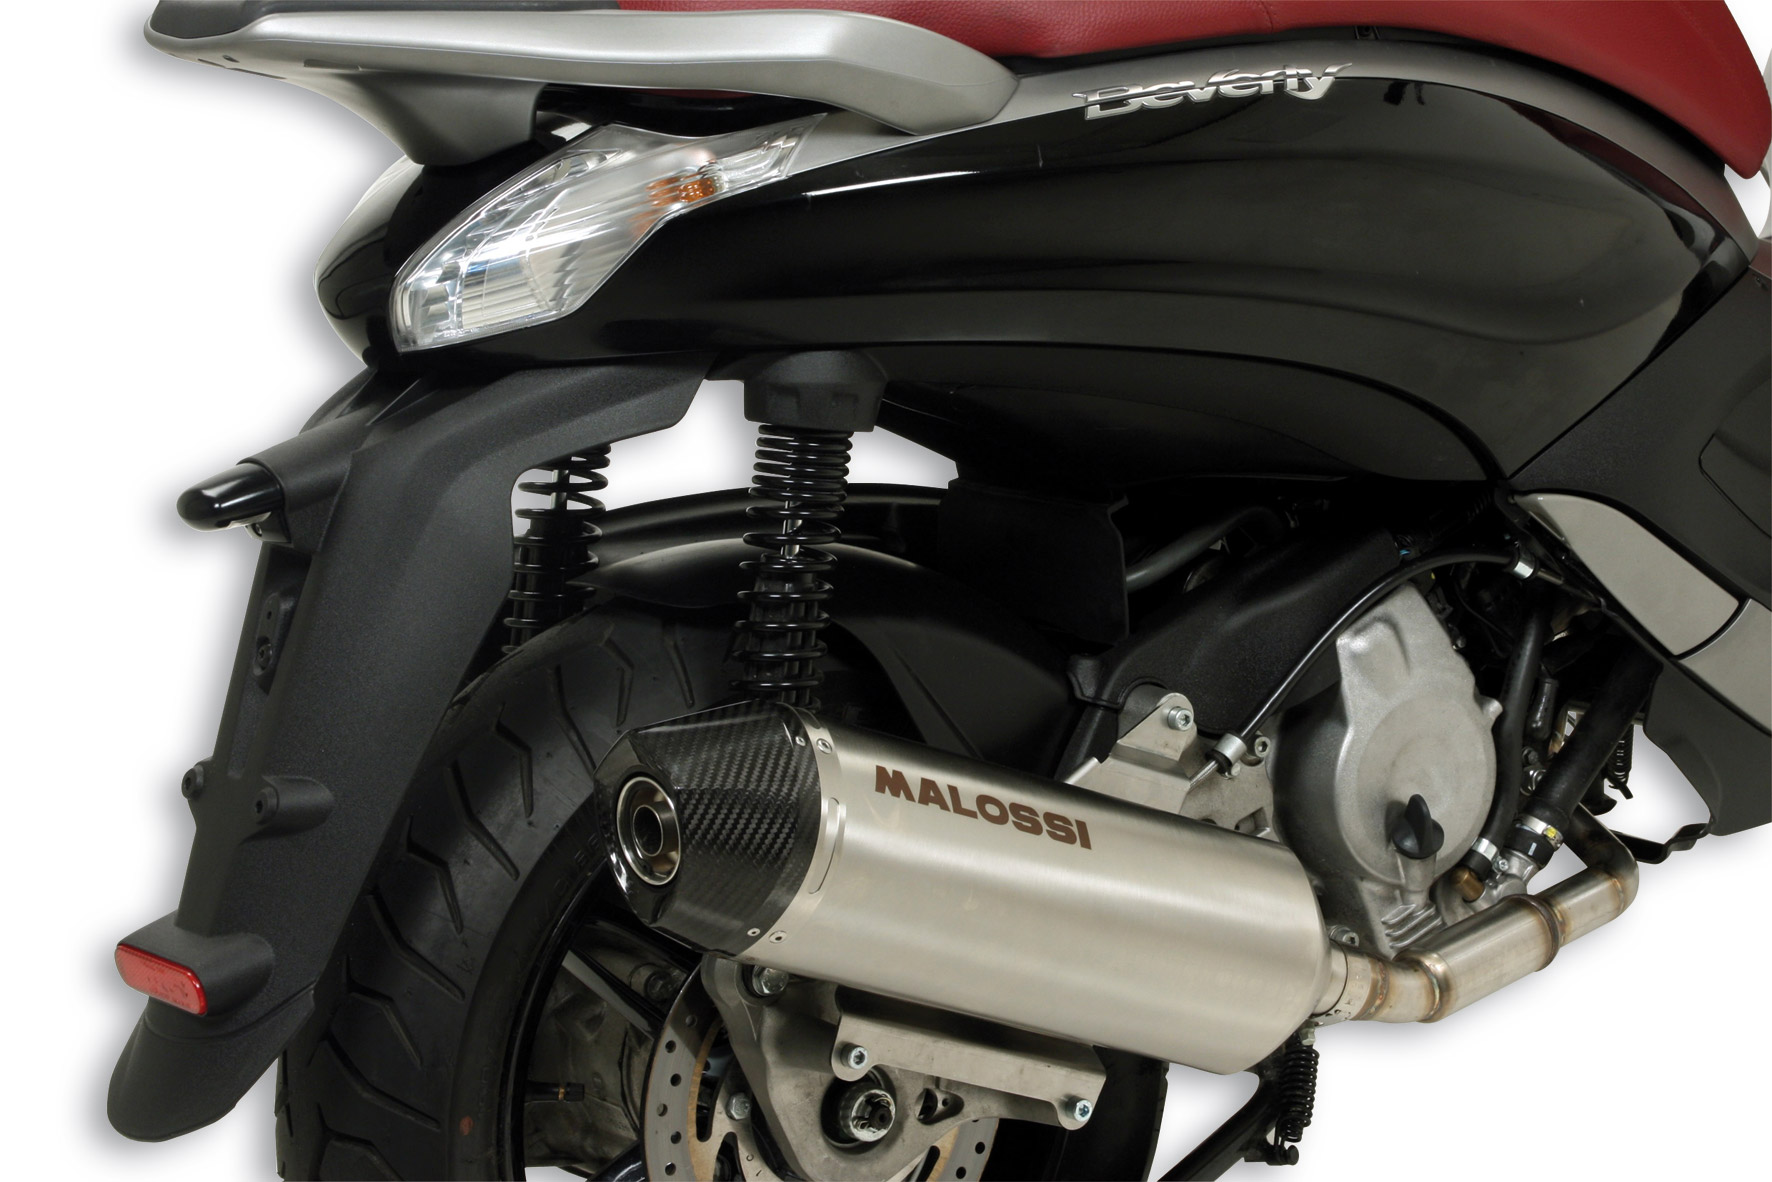 Rx exhaust system - MalossiStore